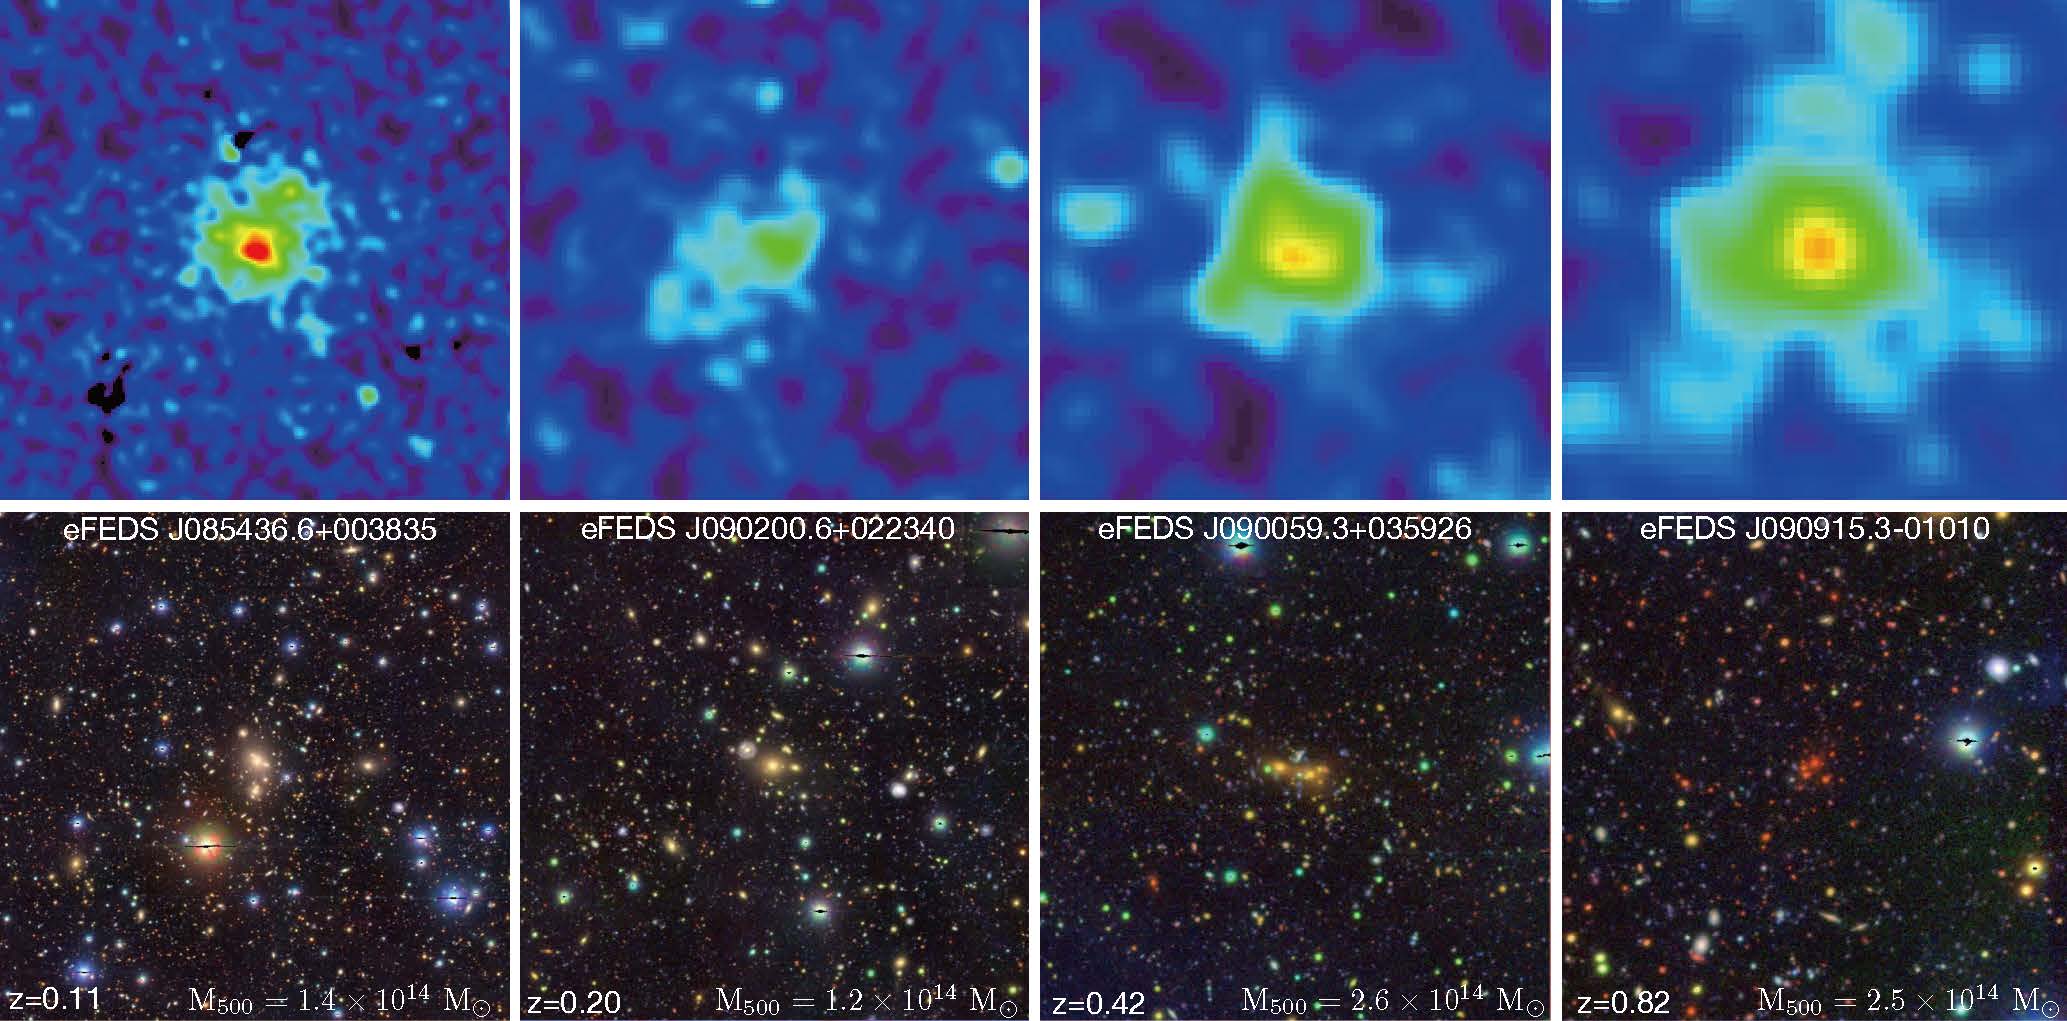 Three eFEDS clusters are shown across the panels from left to right. The top (bottom) row shows the X-ray (optical) imaging of the cluster observed by the eROSITA telescope (HSC survey). The cluster name, mass, and the redshift are labeled in the optical imaging on the bottom row. By combining optical and X-ray imaging, we can efficiently search for galaxy clusters and measure their masses at the same time.